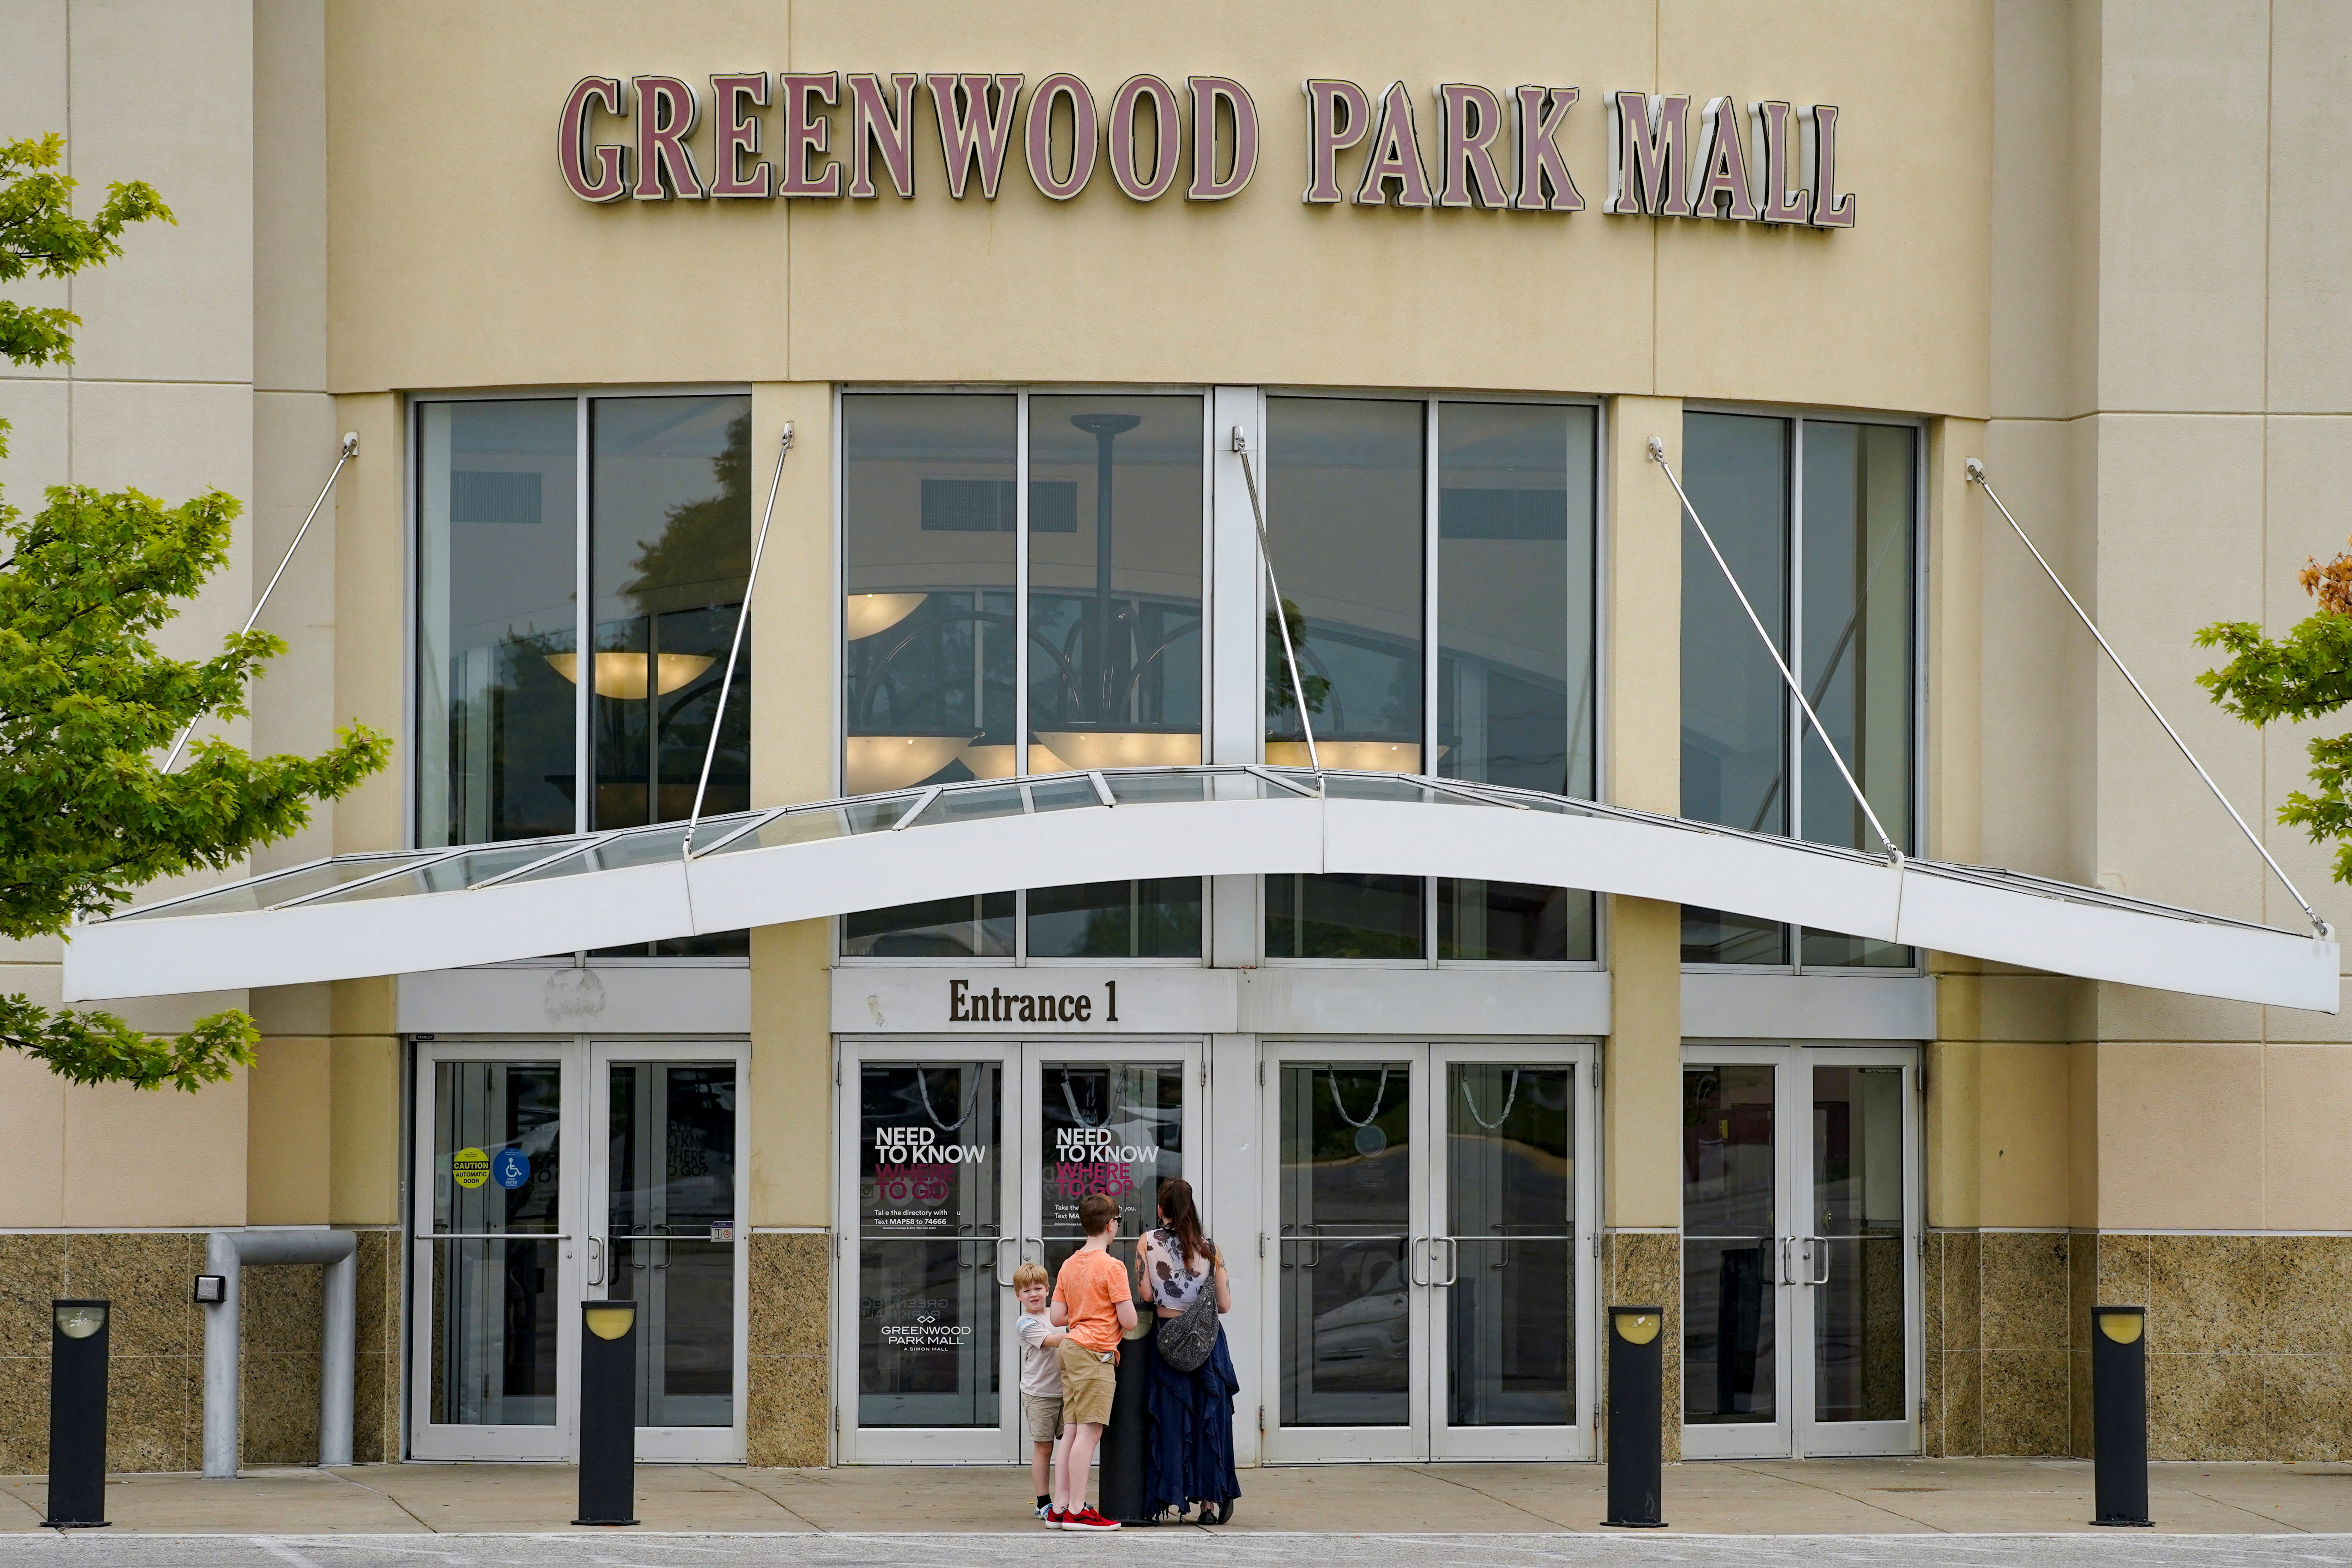 Gunfire at a Shopping Mall in Greenwood